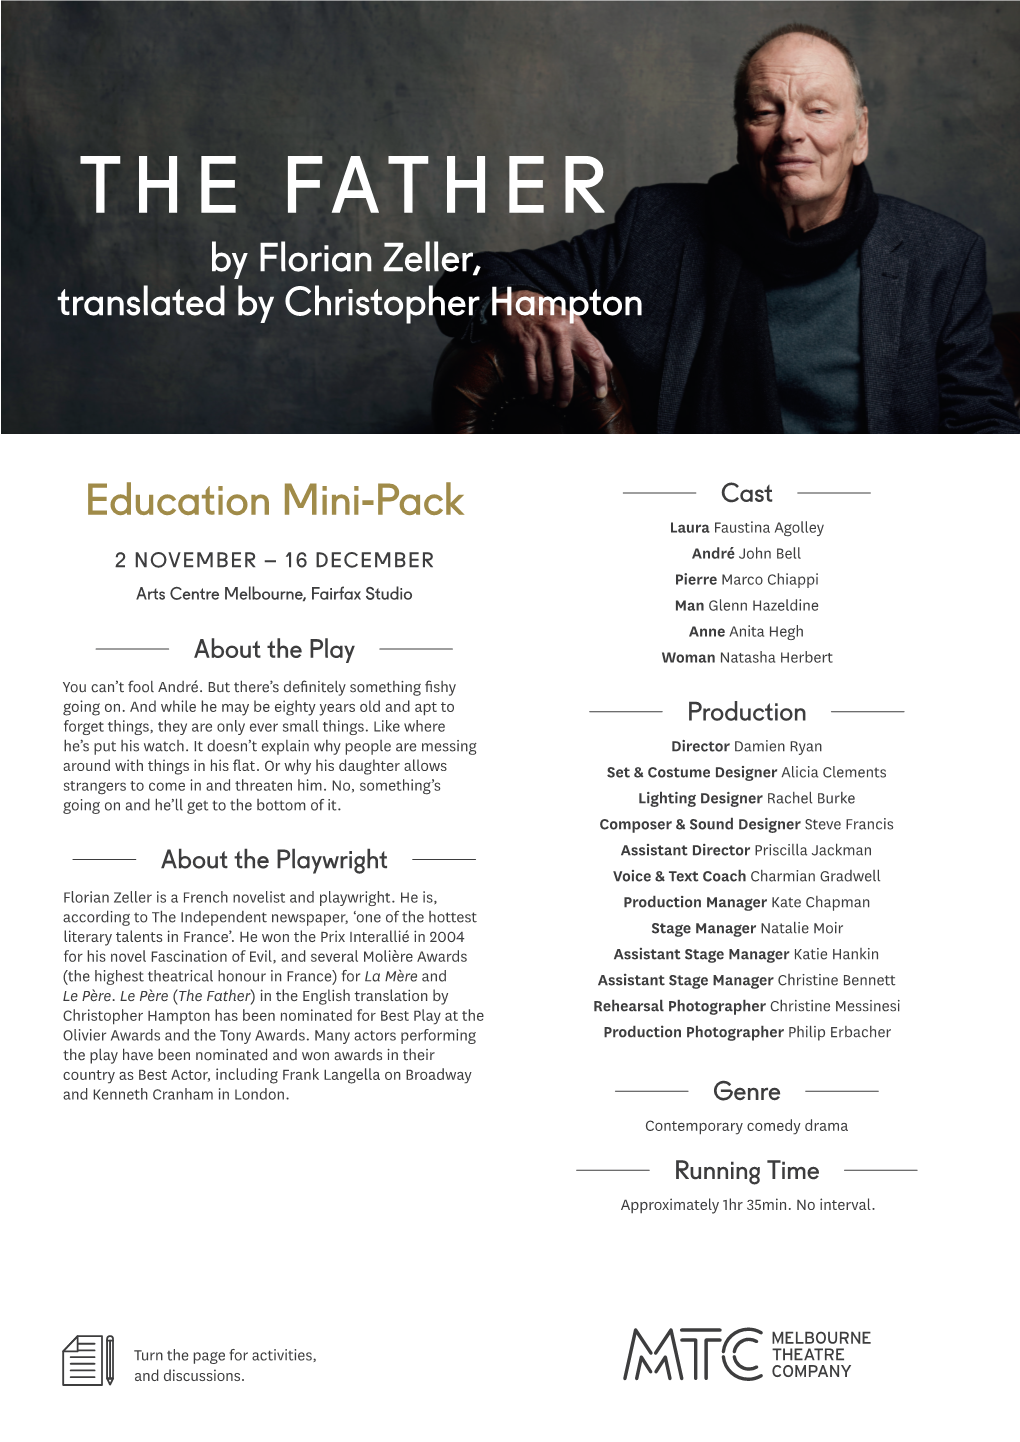 THE FATHER by Florian Zeller, Translated by Christopher Hampton